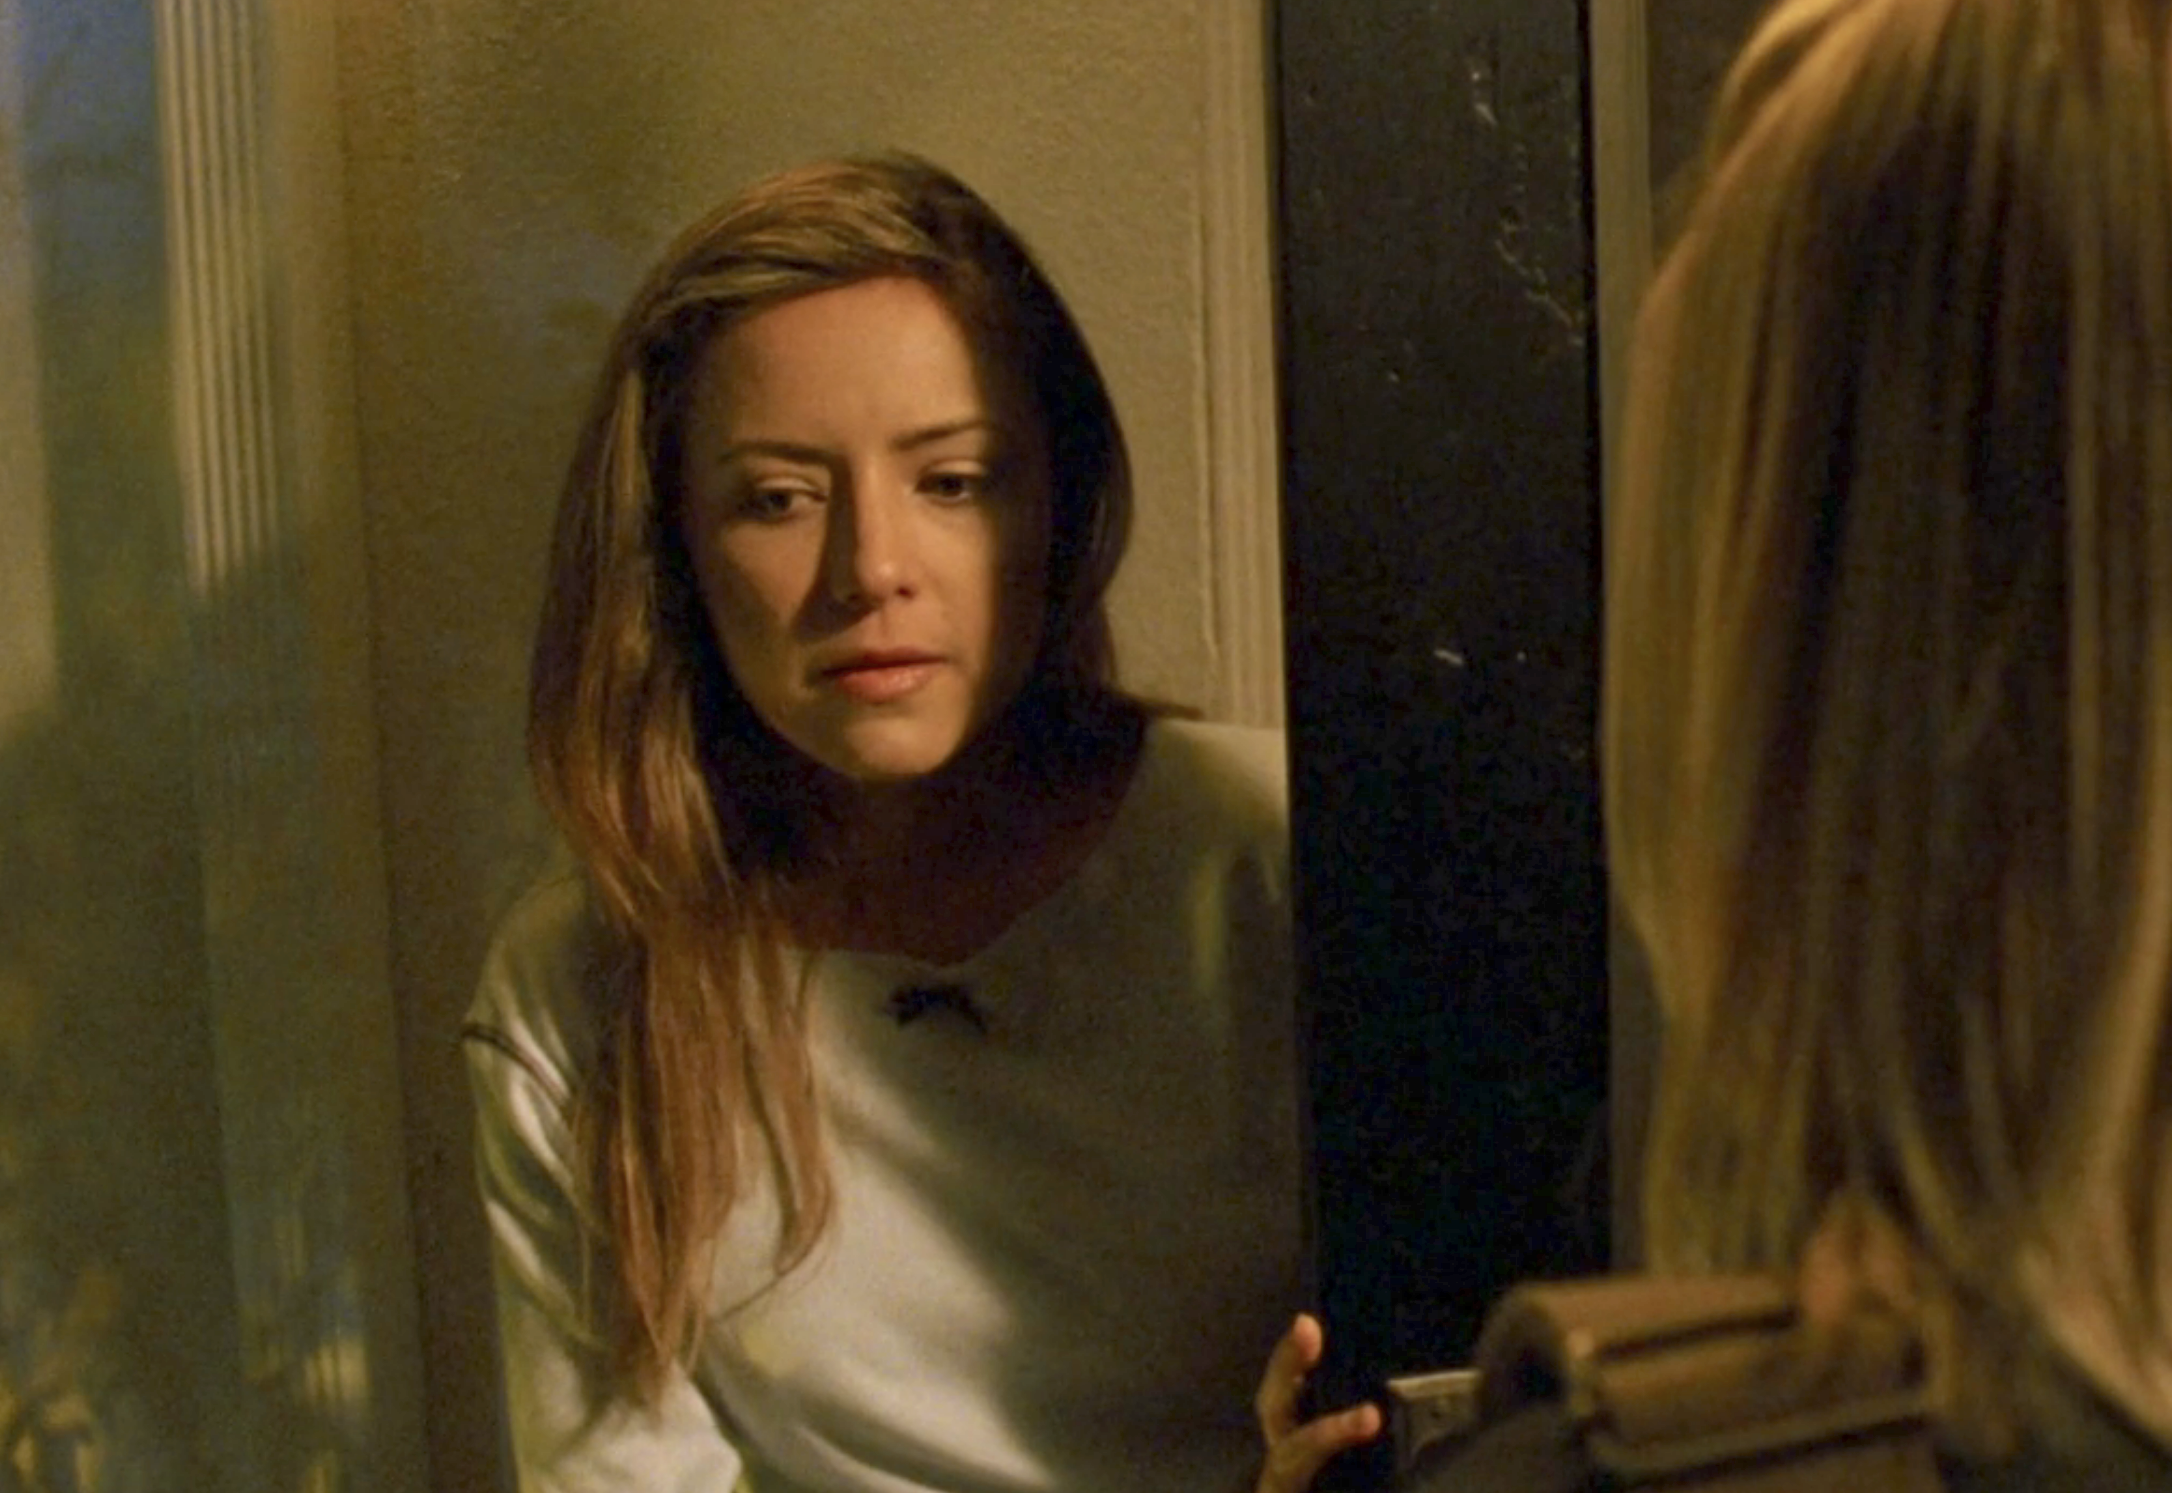 Screenshot from S1E14 of Veronica Mars. A young woman with long blond hair is standing in a front door talking to Veronica, whose back is to us.